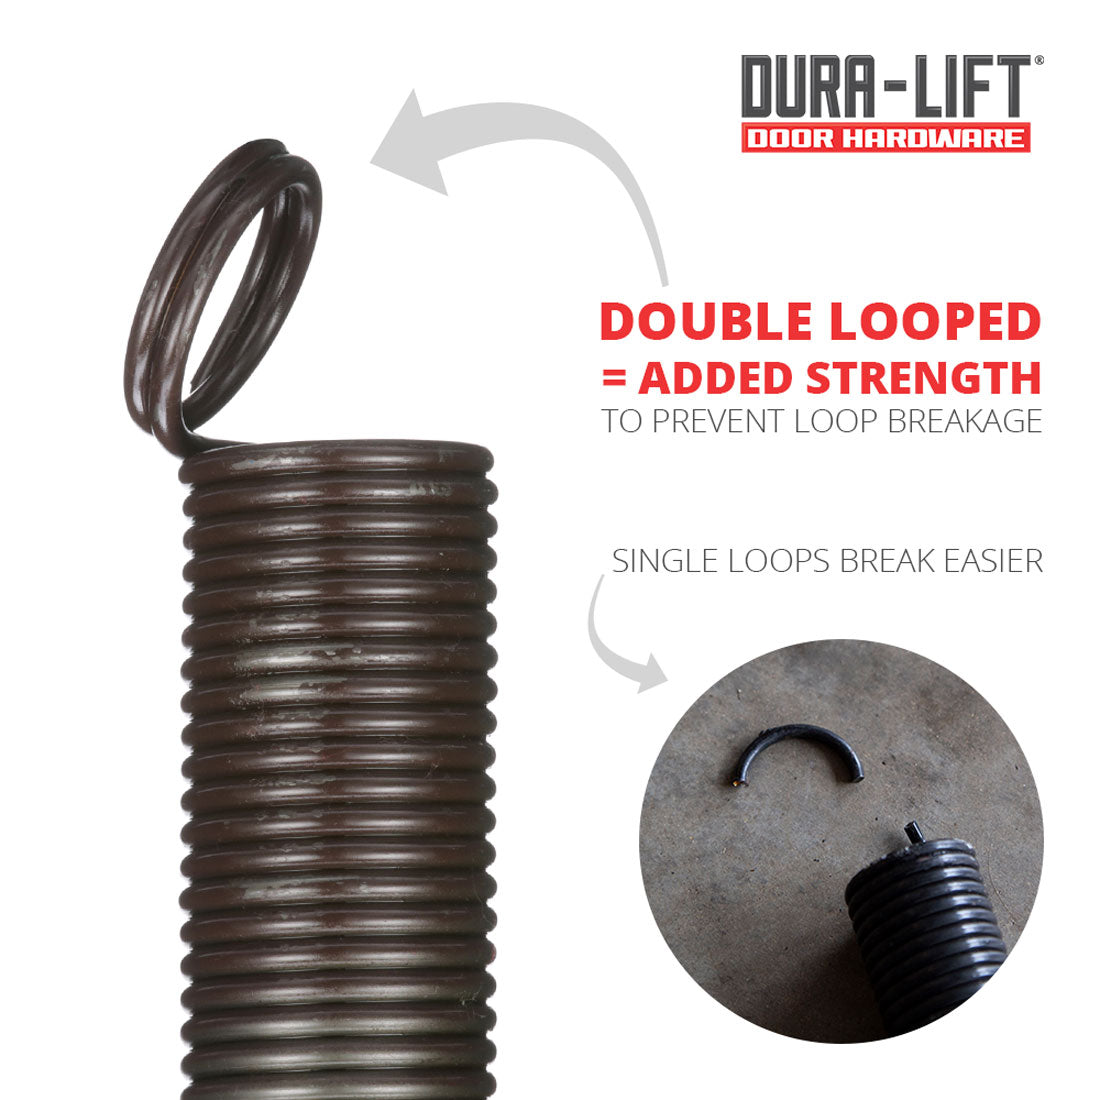 DURA-LIFT 160 lb Heavy-Duty Doubled-Looped Garage Door Extension Spring (2-Pack)